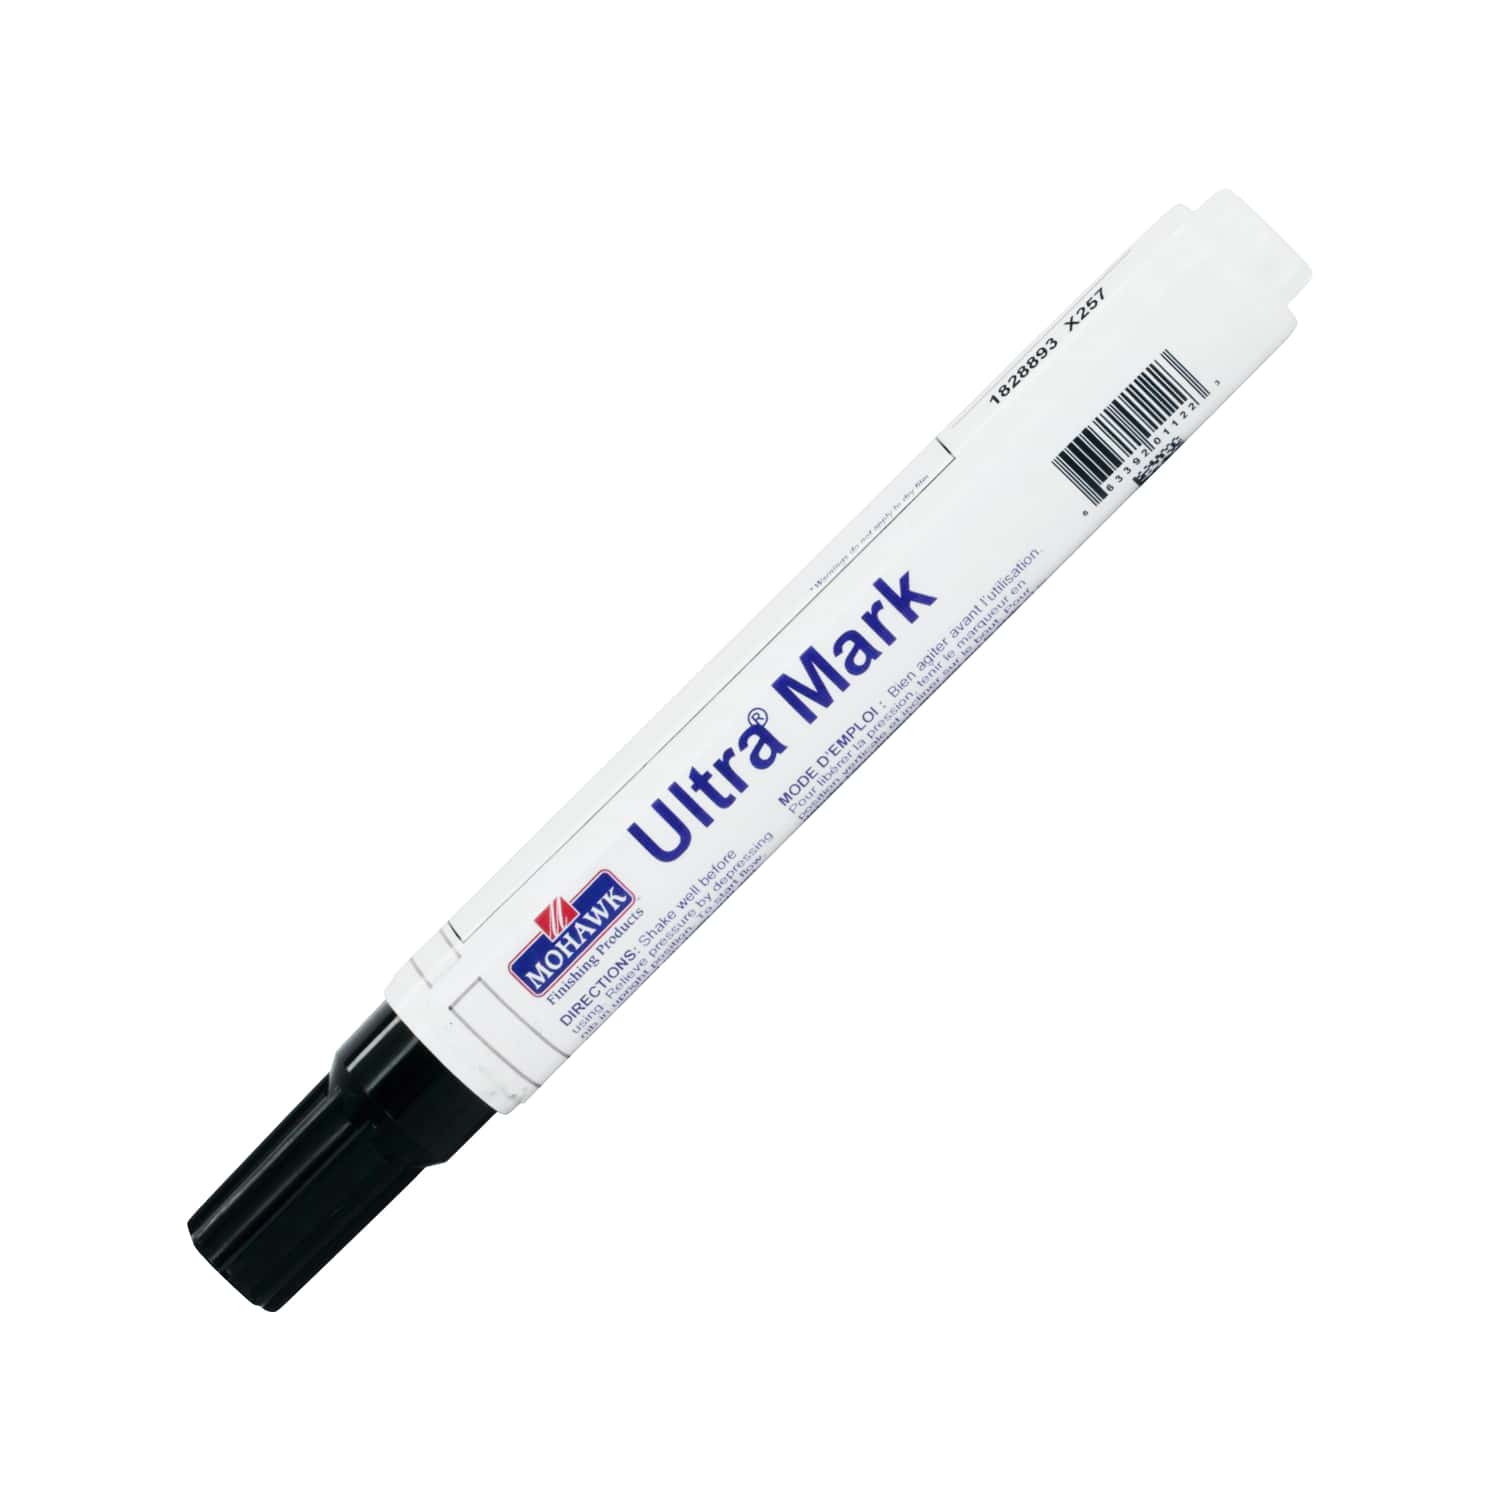  Mohawk Finishing Products Ultra Mark Wood Stain Touch Up  Marker, White M280-0202, 1 Count : Tools & Home Improvement